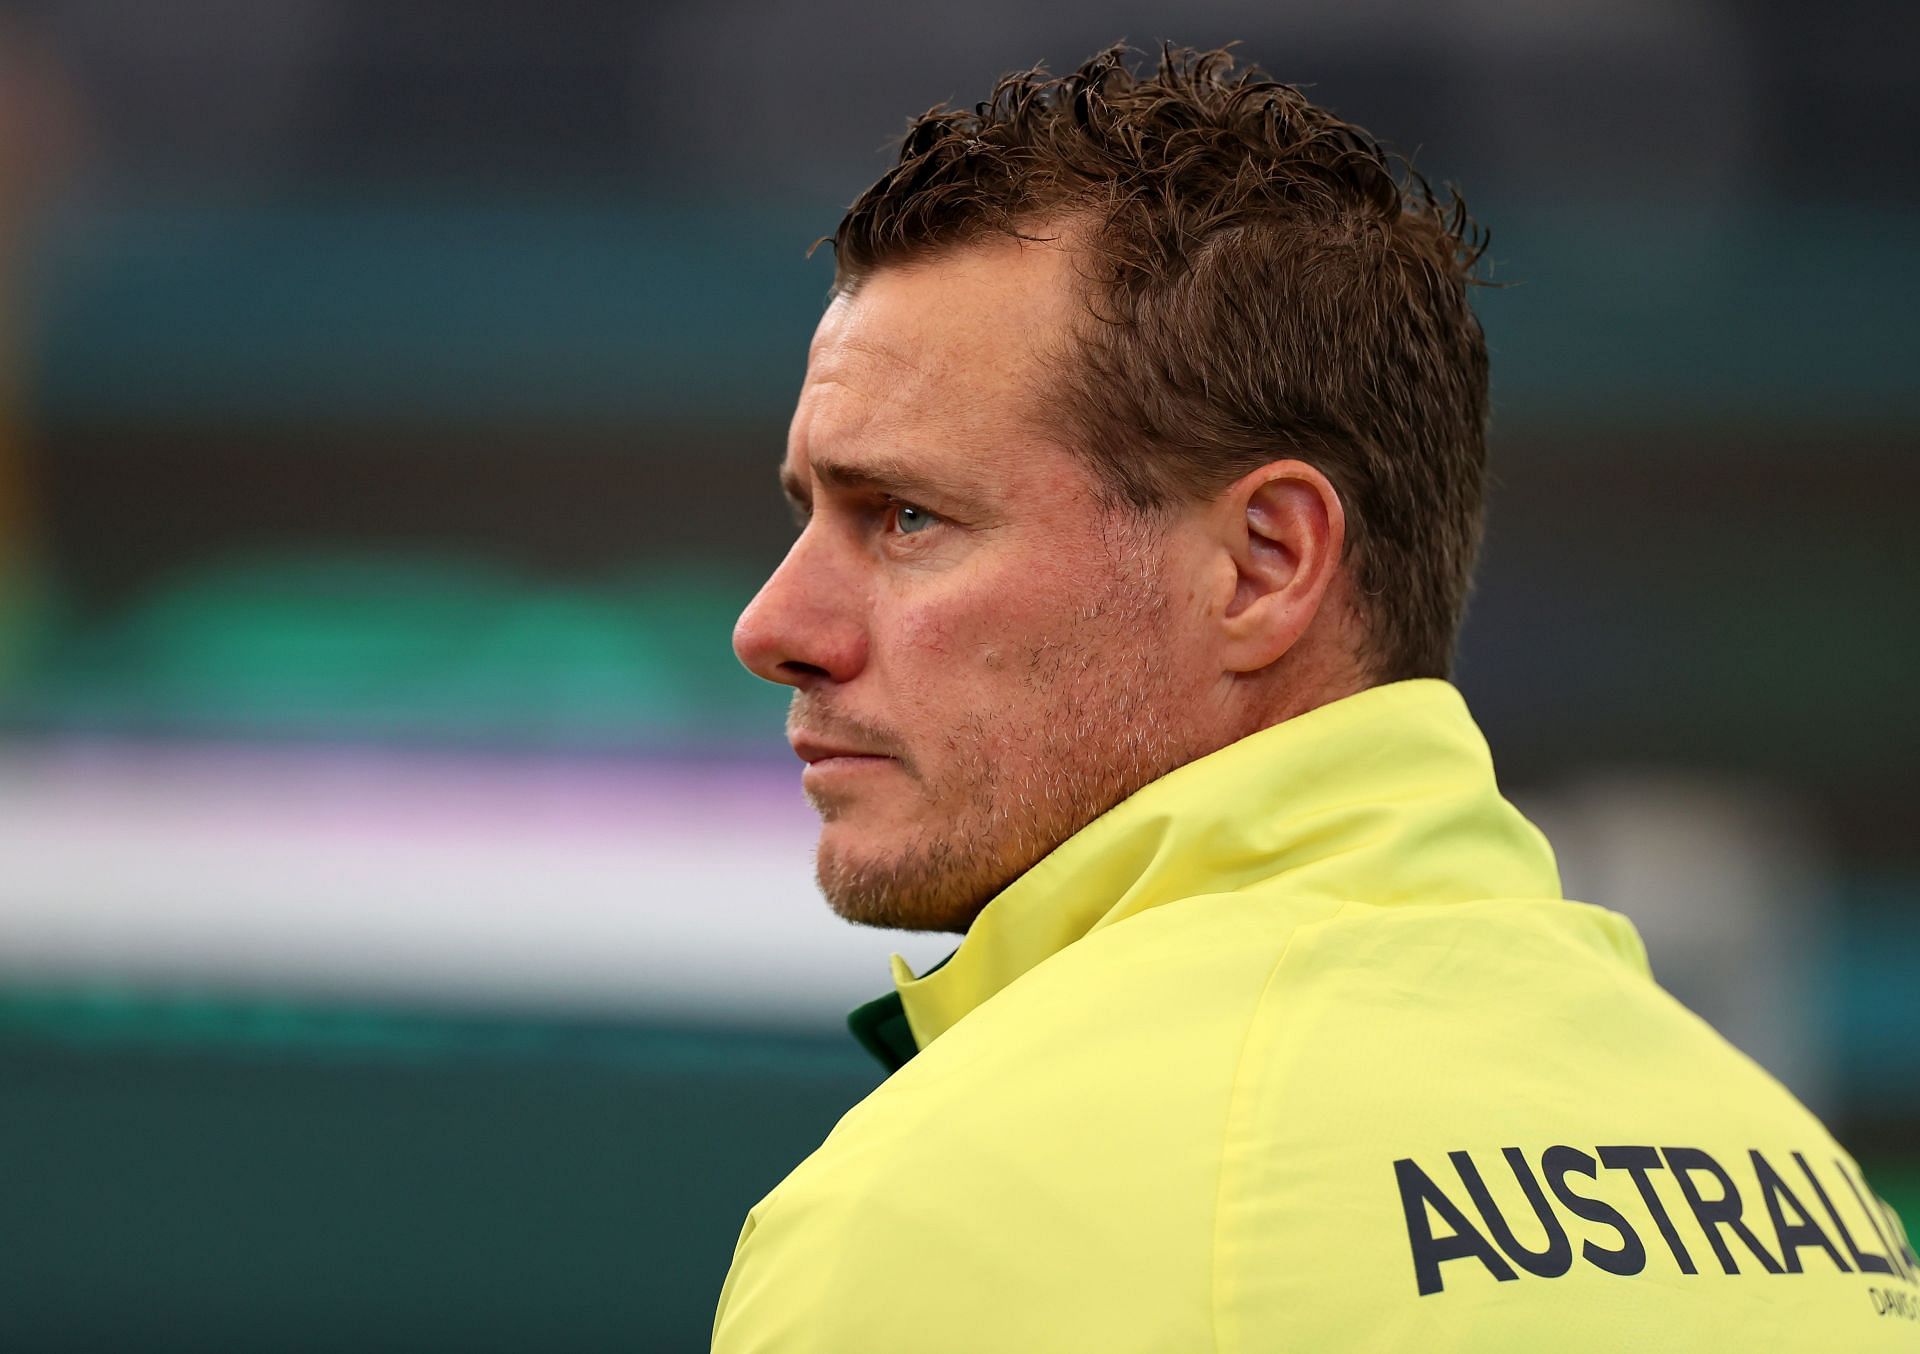 Lleyton Hewitt, team captain of Australia looks on during the Davis Cup